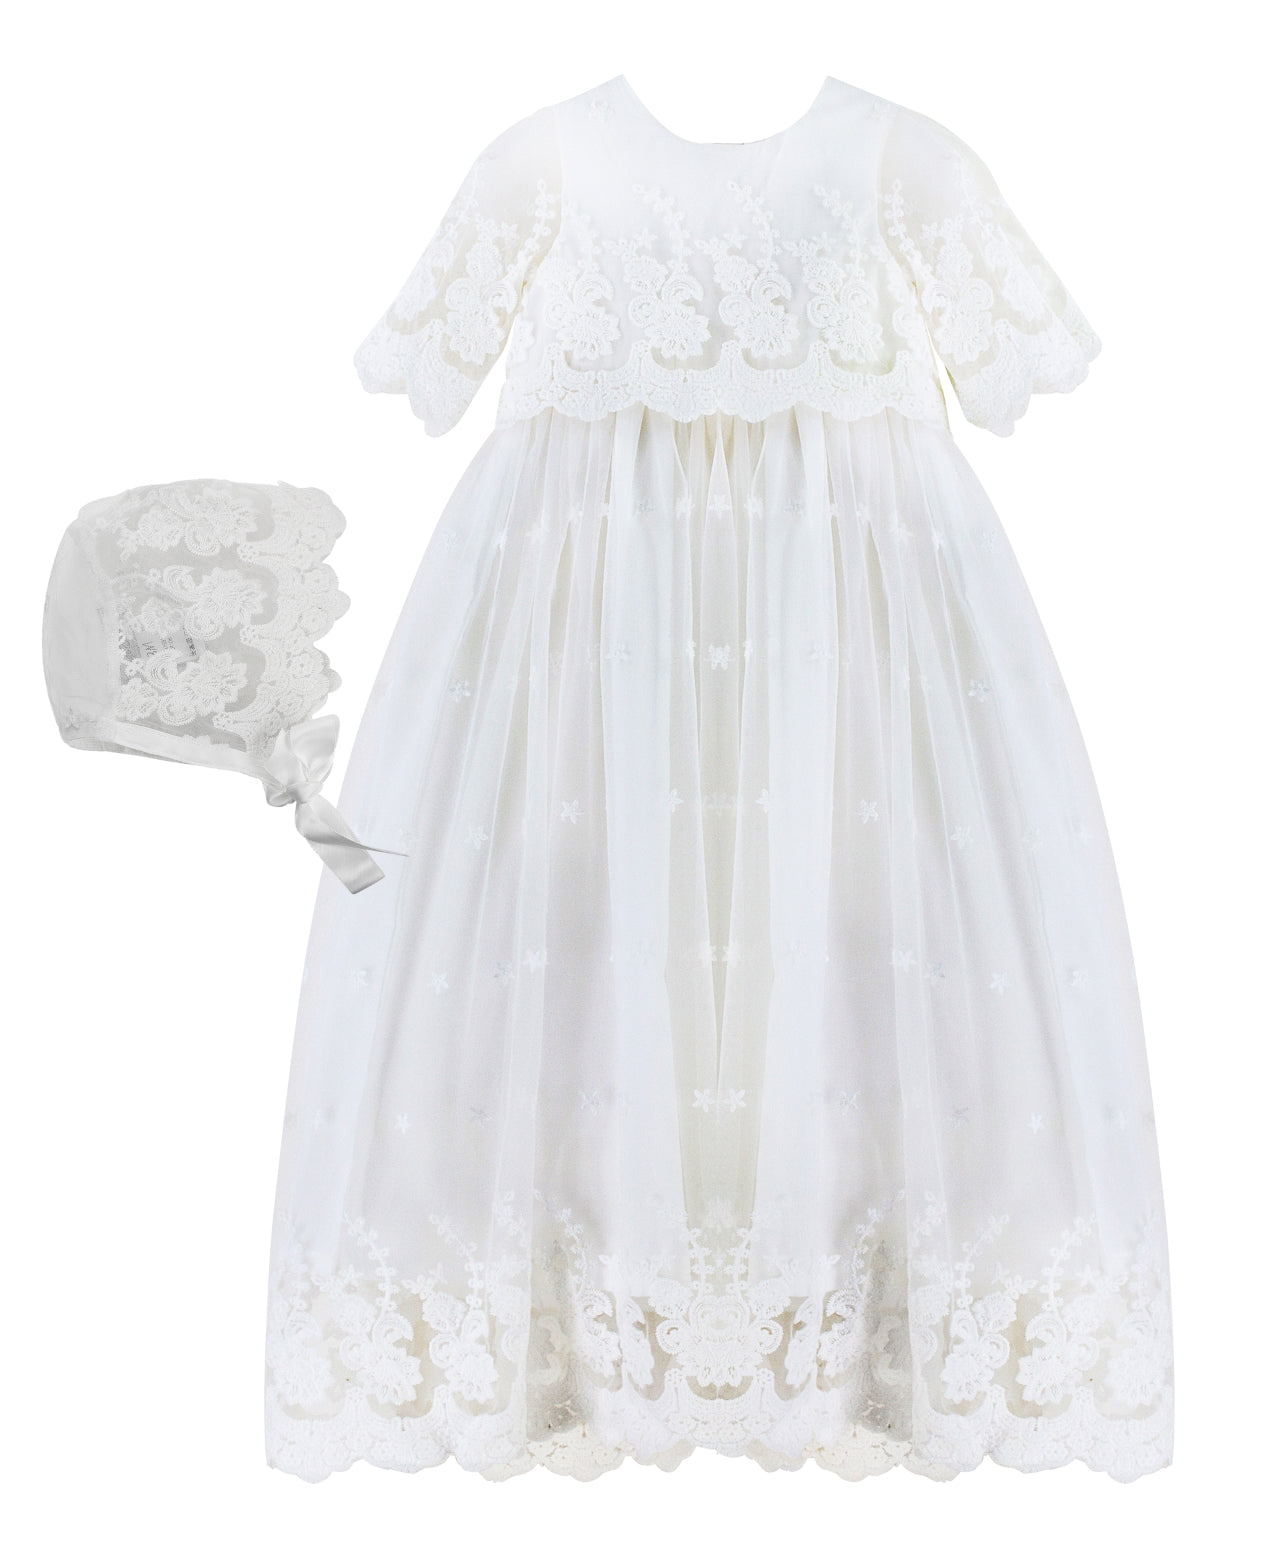 Star Lace Baby Girl Christening Gown with Bonnet 2 - Imagewear